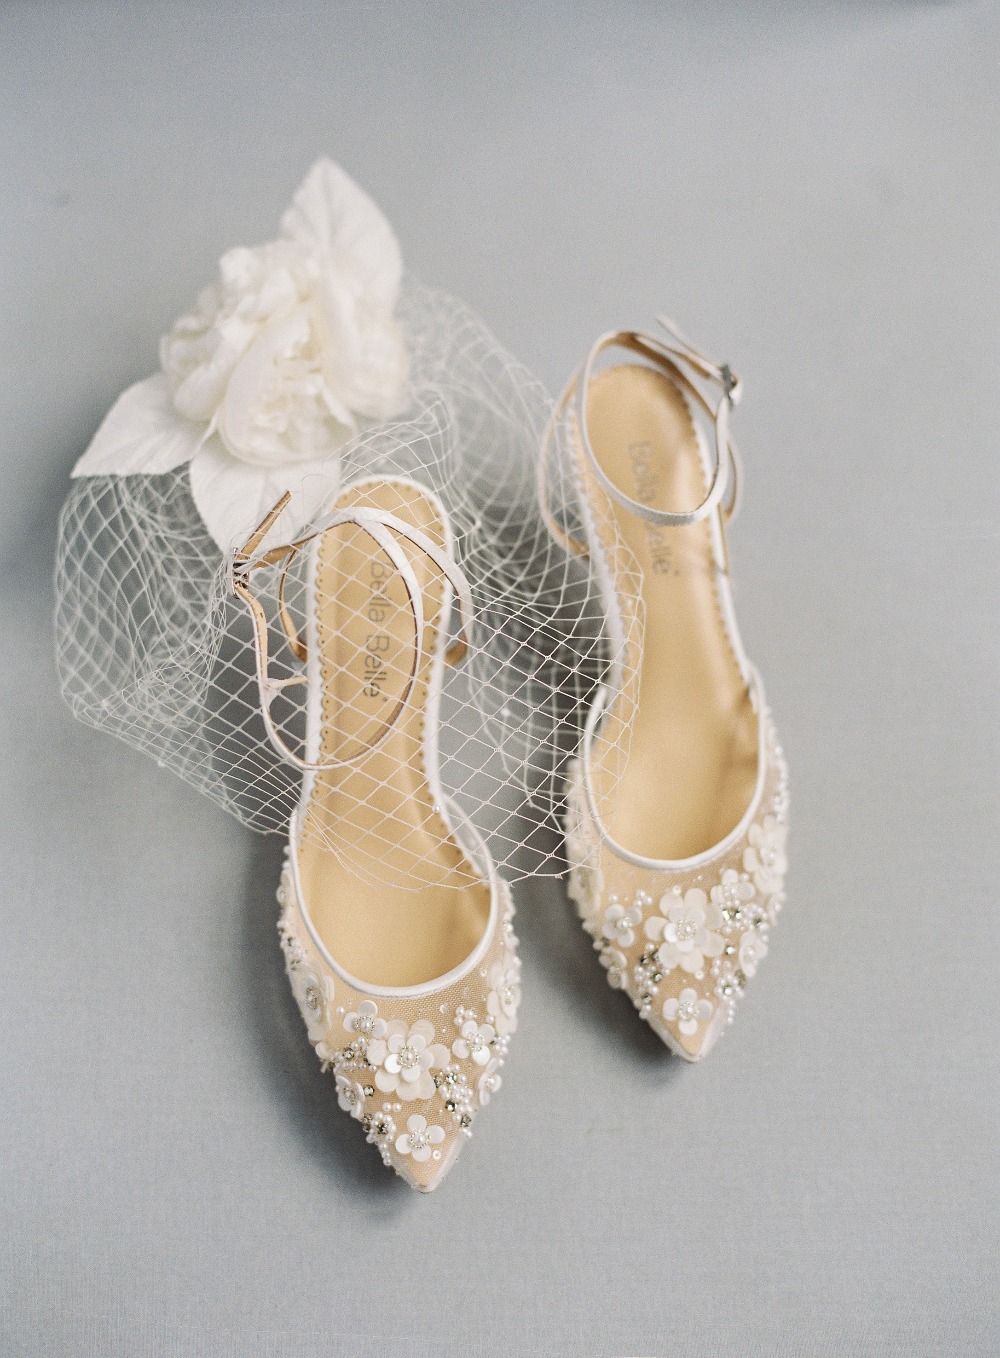 How To Pair Your Bella Belle Shoes With Springs Wedding Dresses